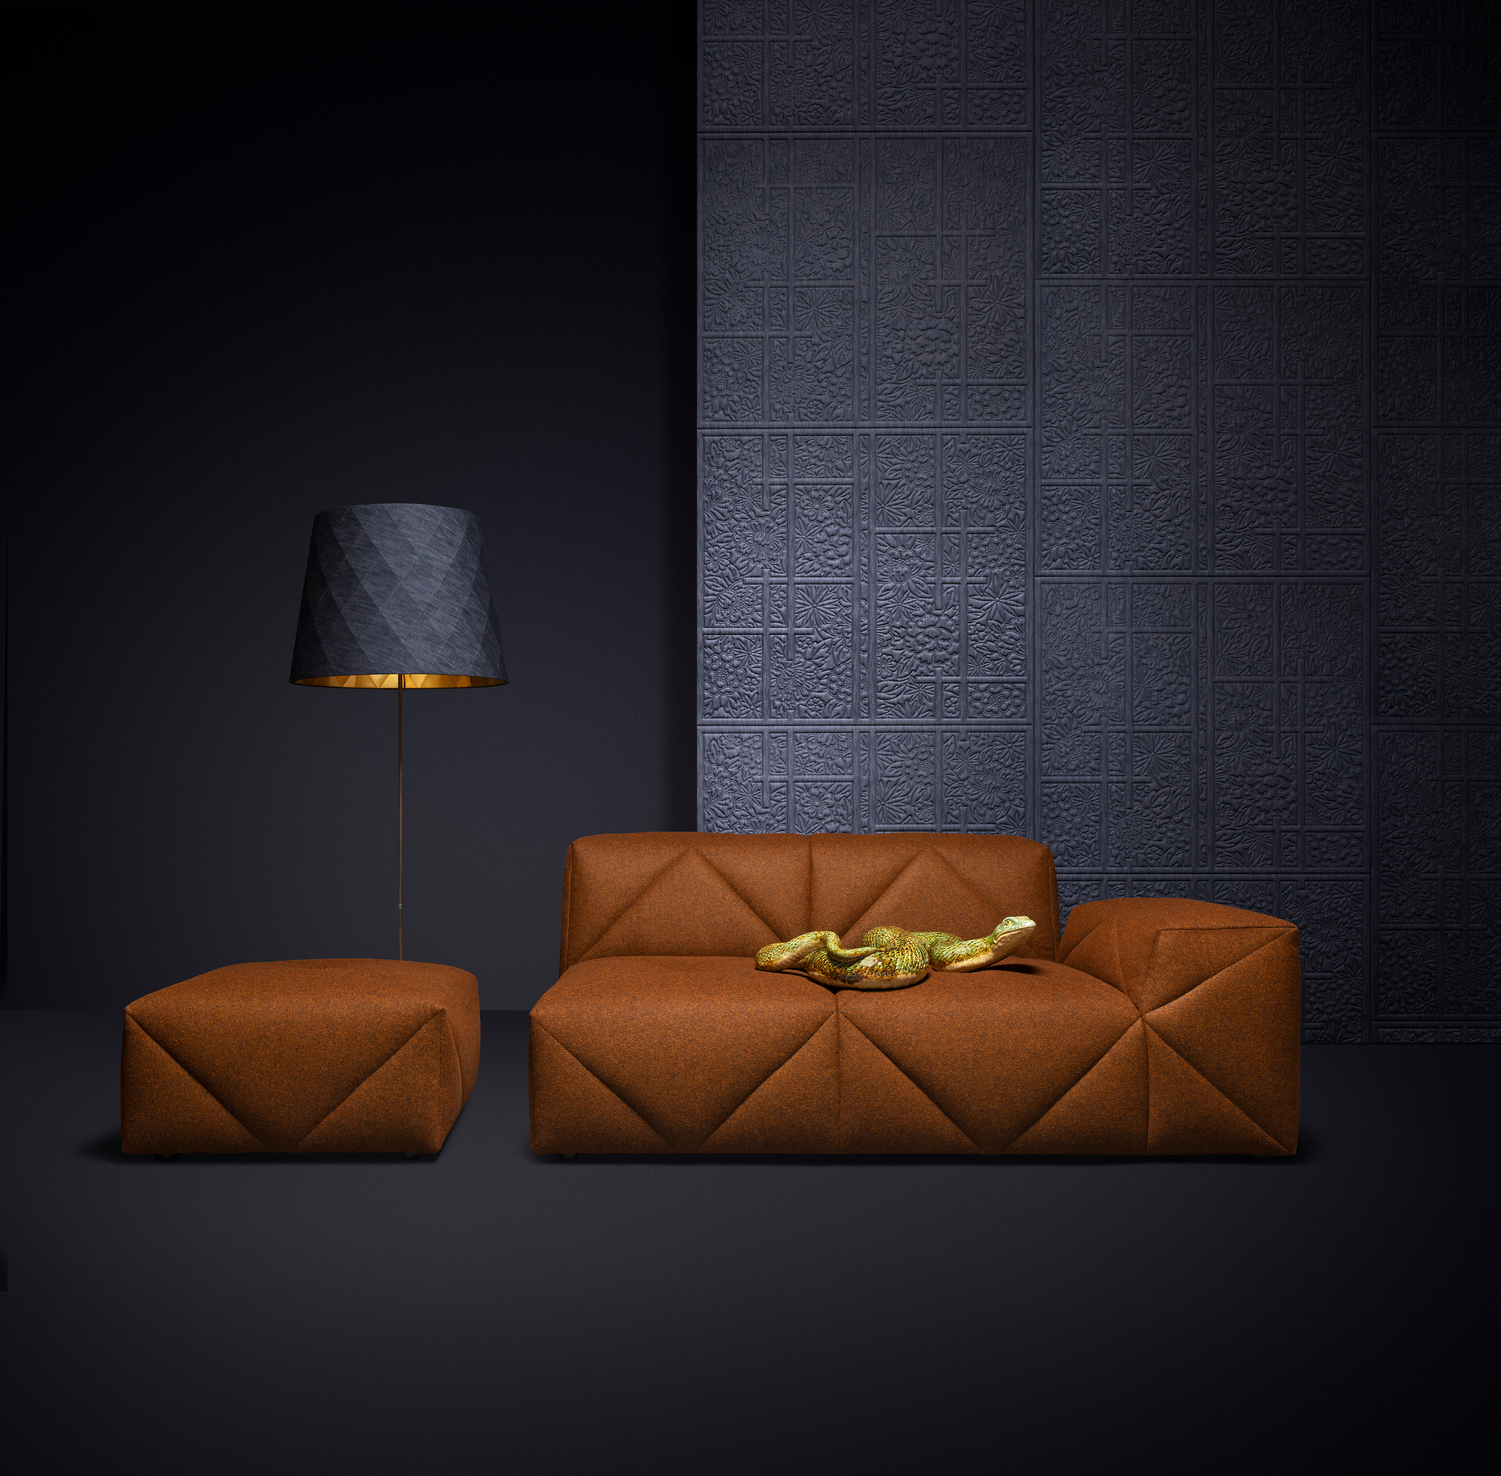 Poetic composition with BFF Sofa and Wallcovering Shoji Blossom